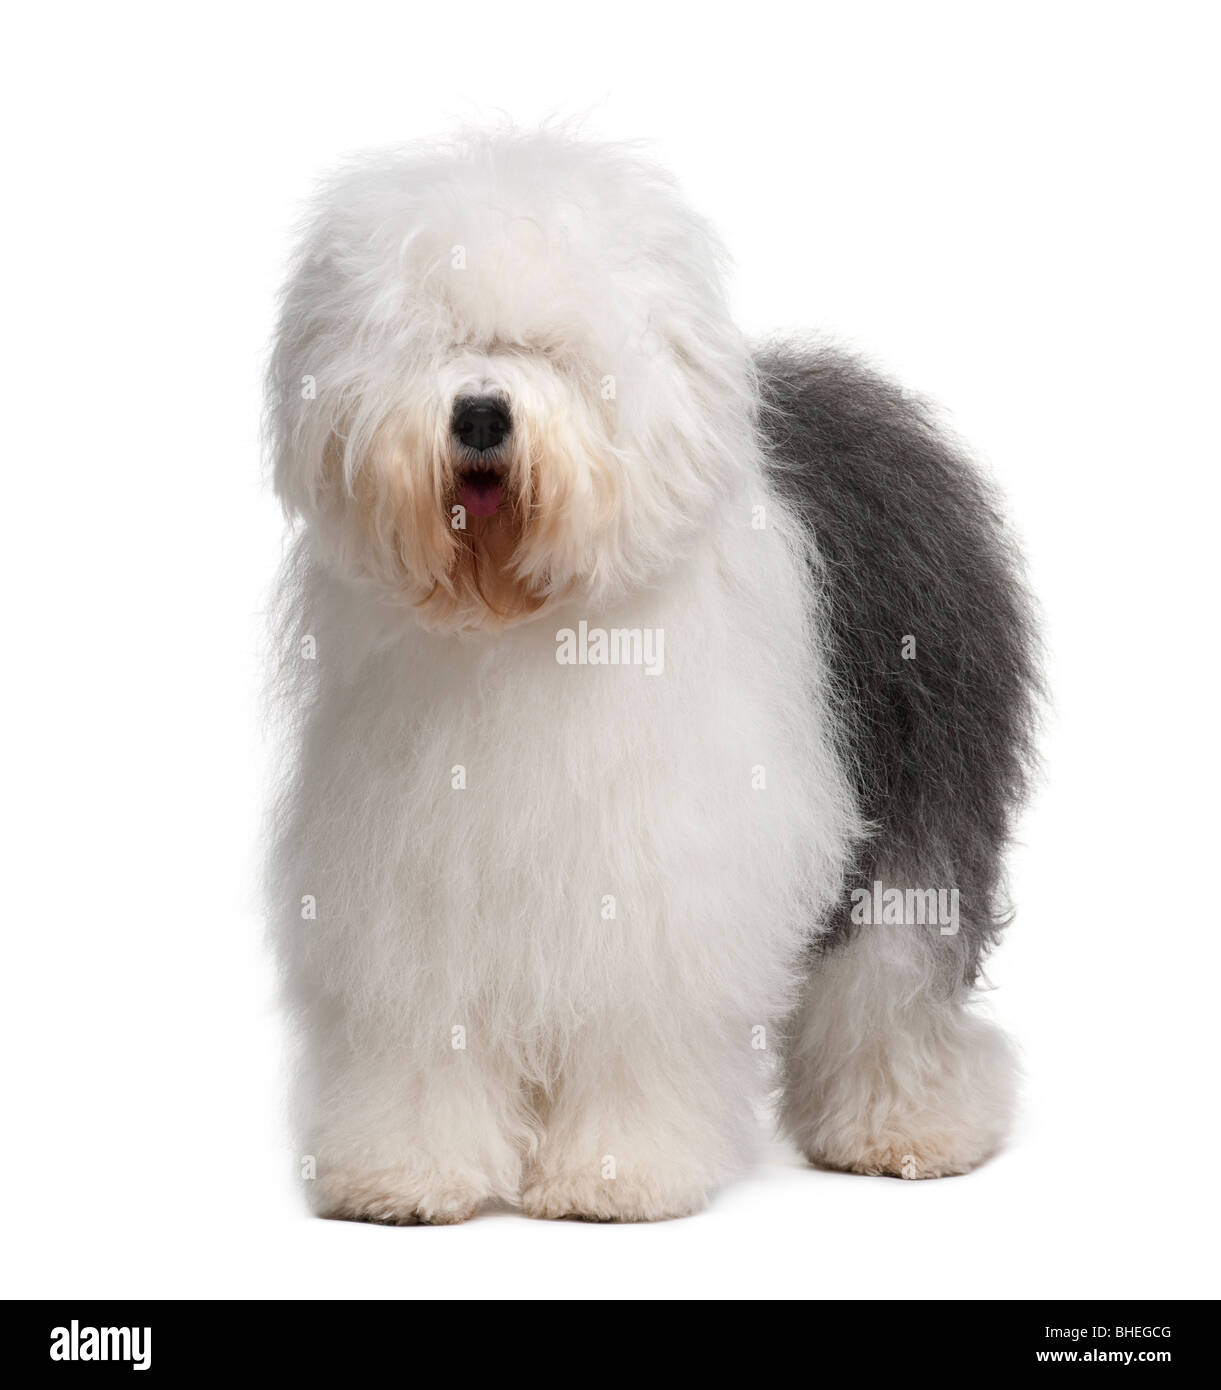 Old English Sheepdog, 3 Years old, standing in front of white background Stock Photo